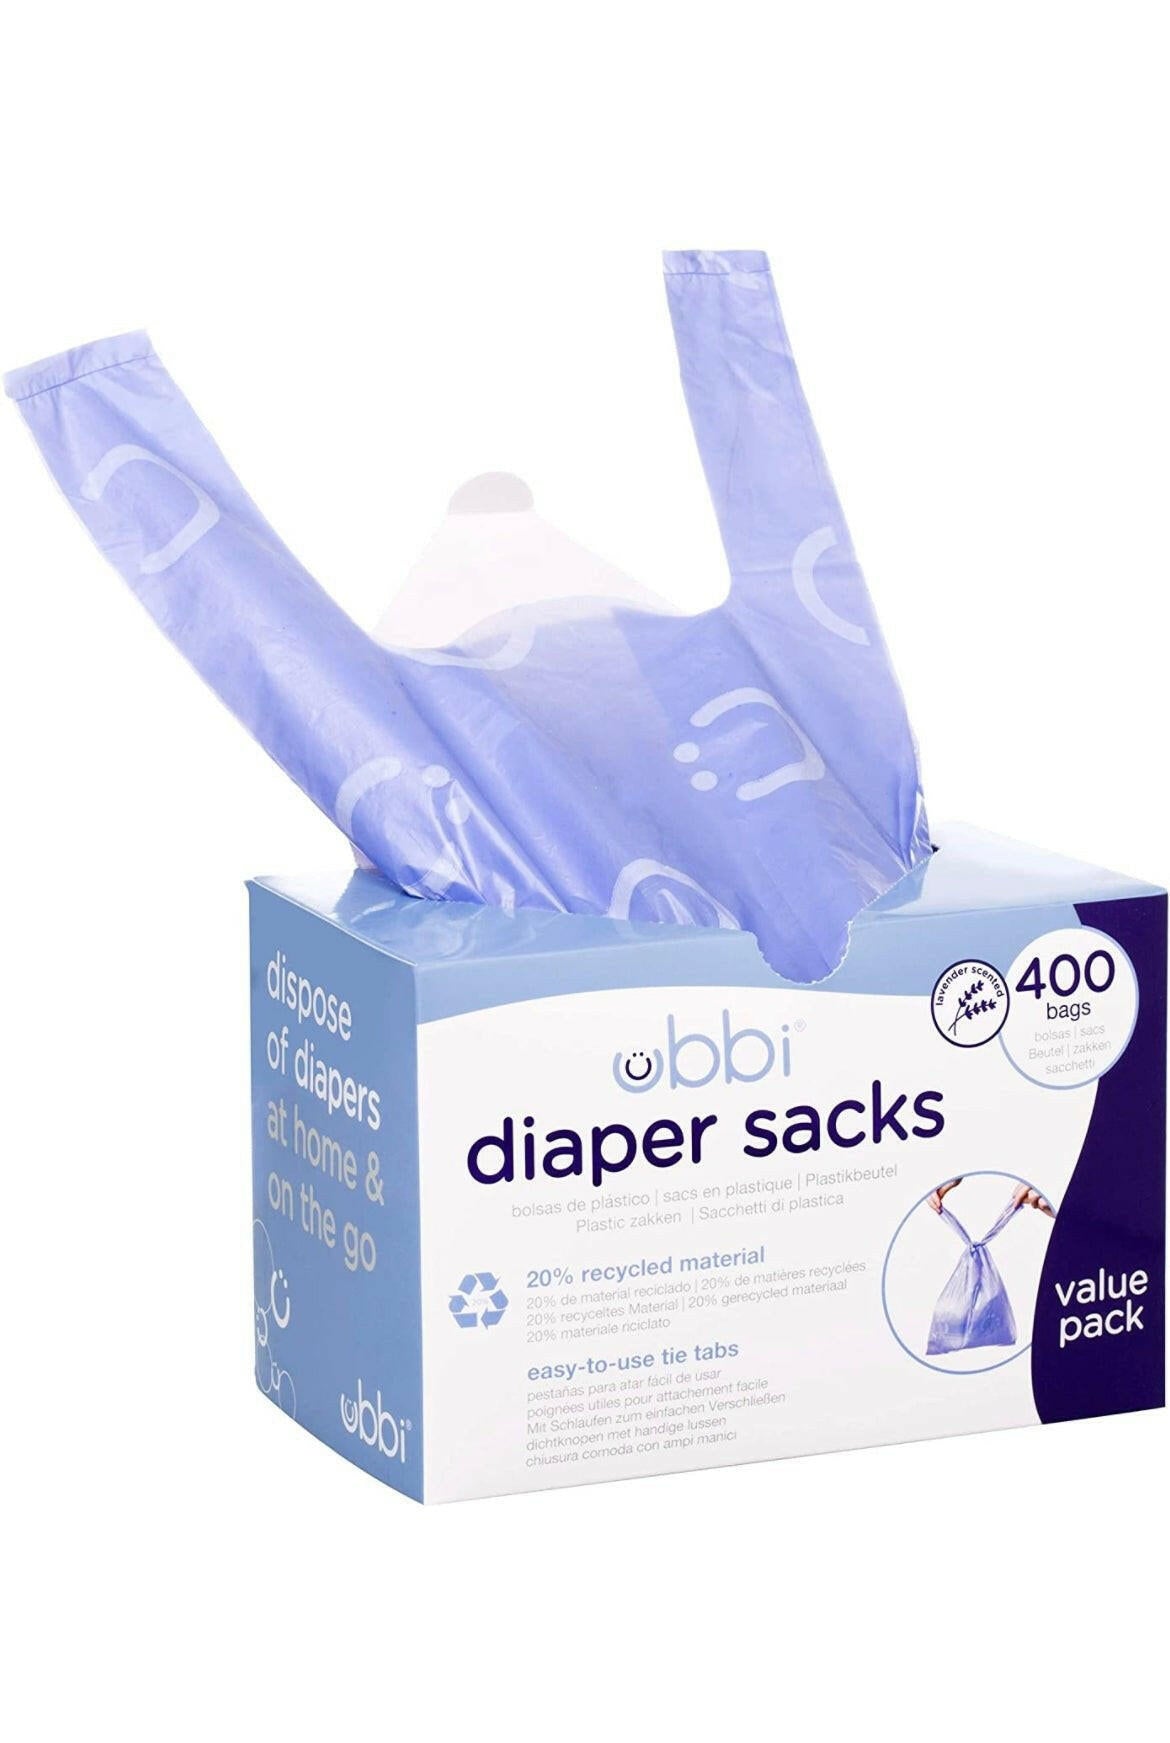 Ubbi Disposable Diaper Sacks, Lavender Scented, Easy-To-Tie Tabs, Made with Recycled Material, Diaper Disposal or Pet Waste Bags, 400 count.